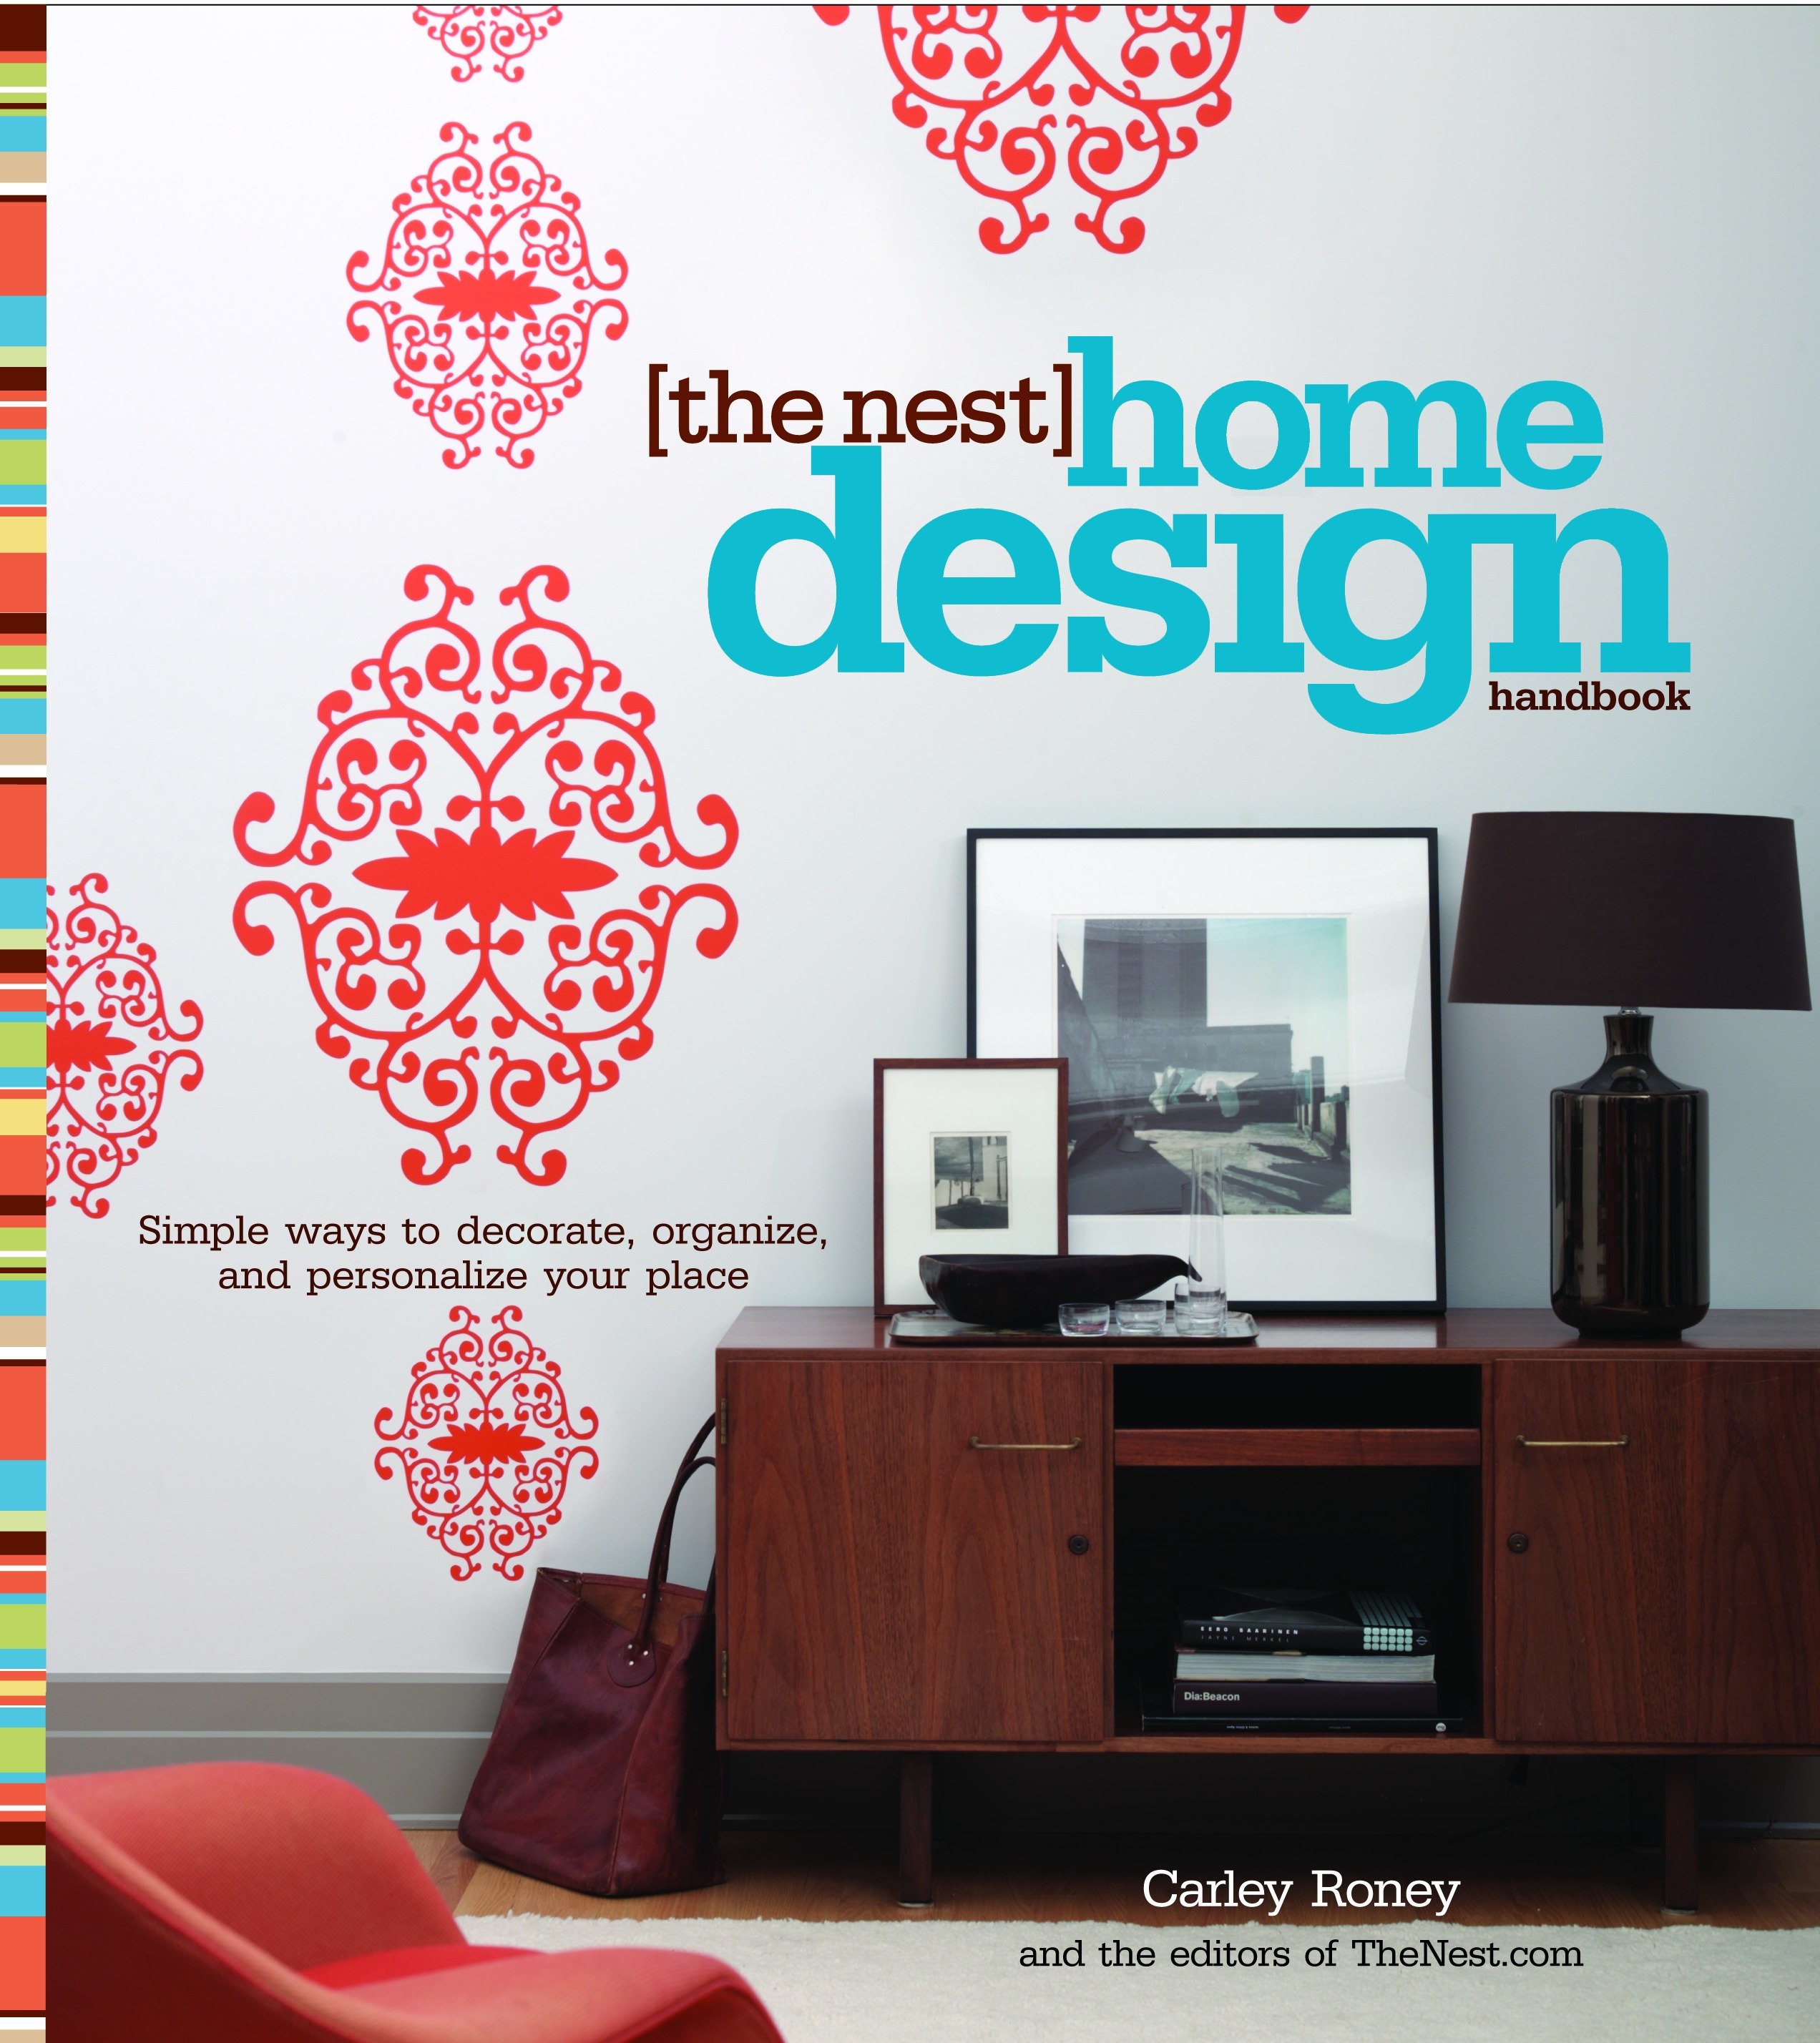 The nest home design handbook simple ways to decorate, organize, and personalize your place cover image